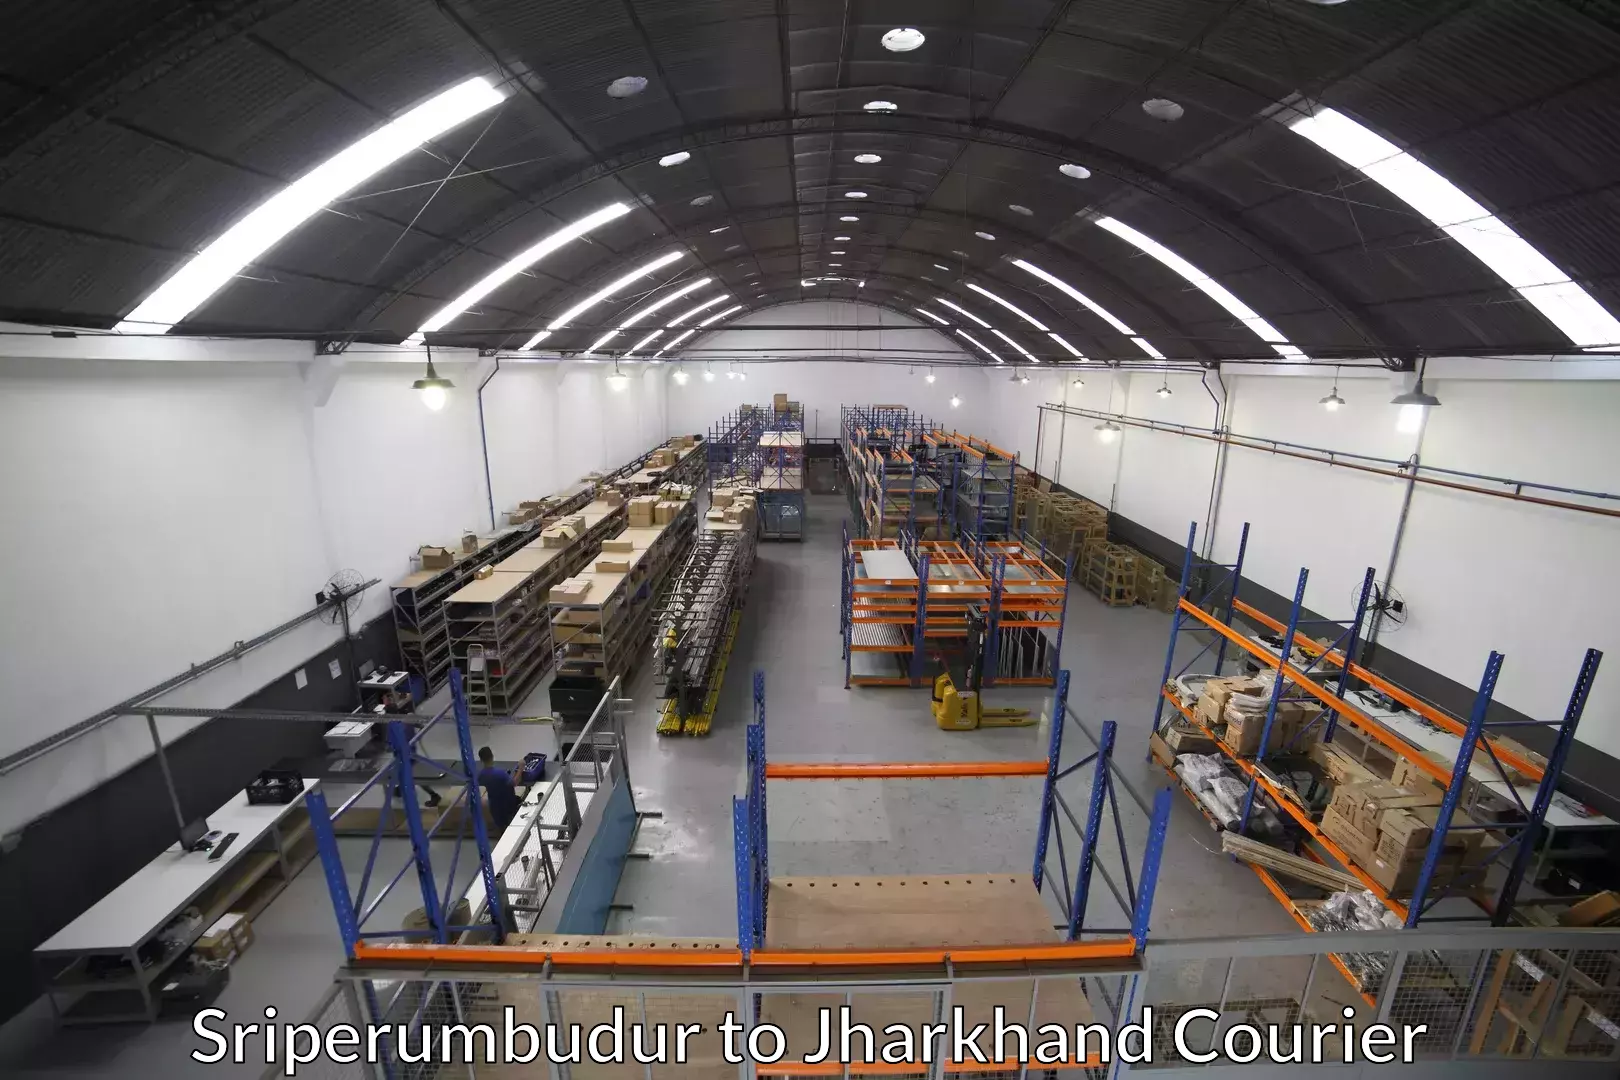 Moving and handling services Sriperumbudur to Jharkhand